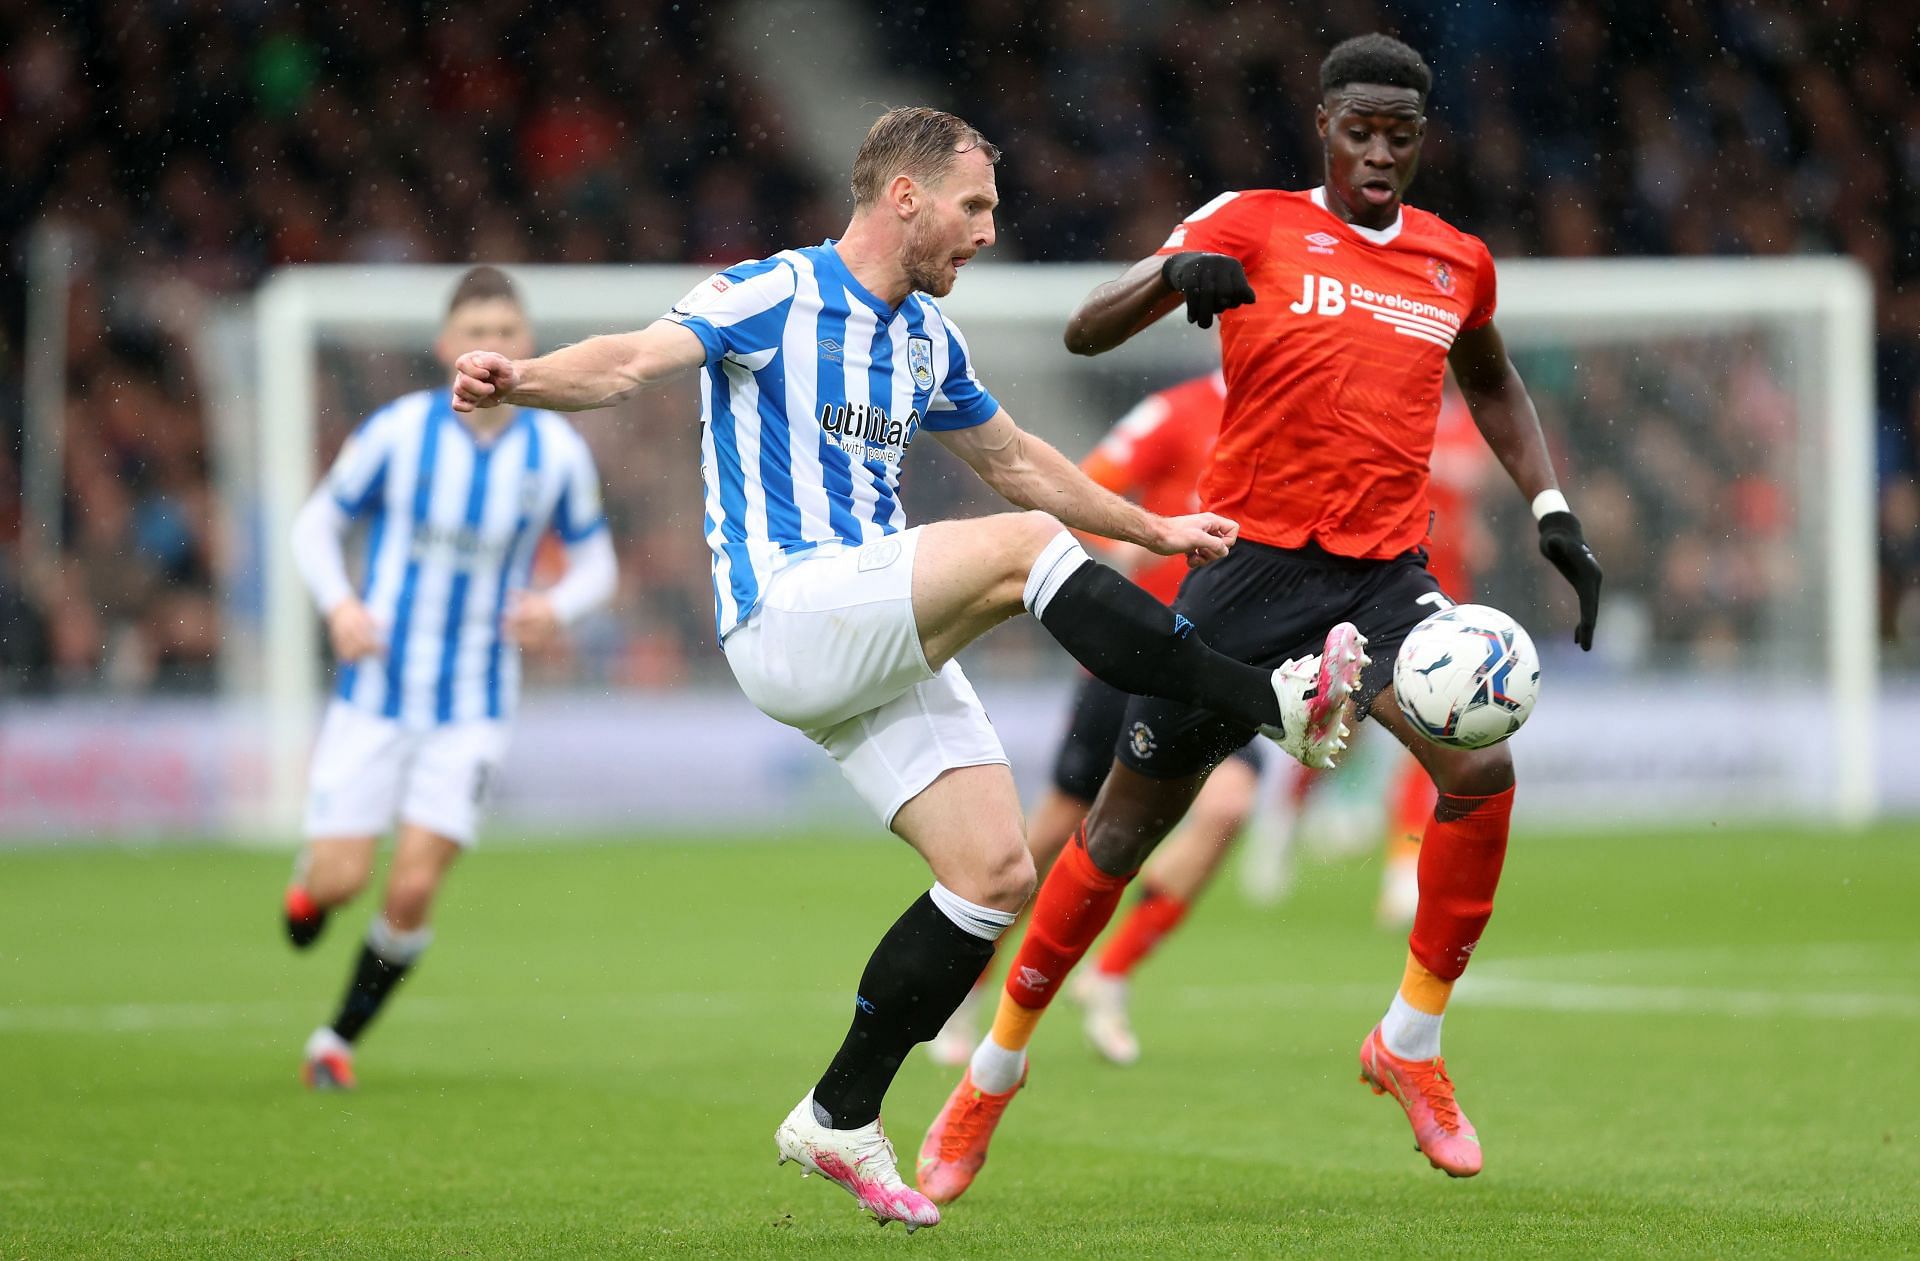 Lees will be a huge miss for Huddersfield